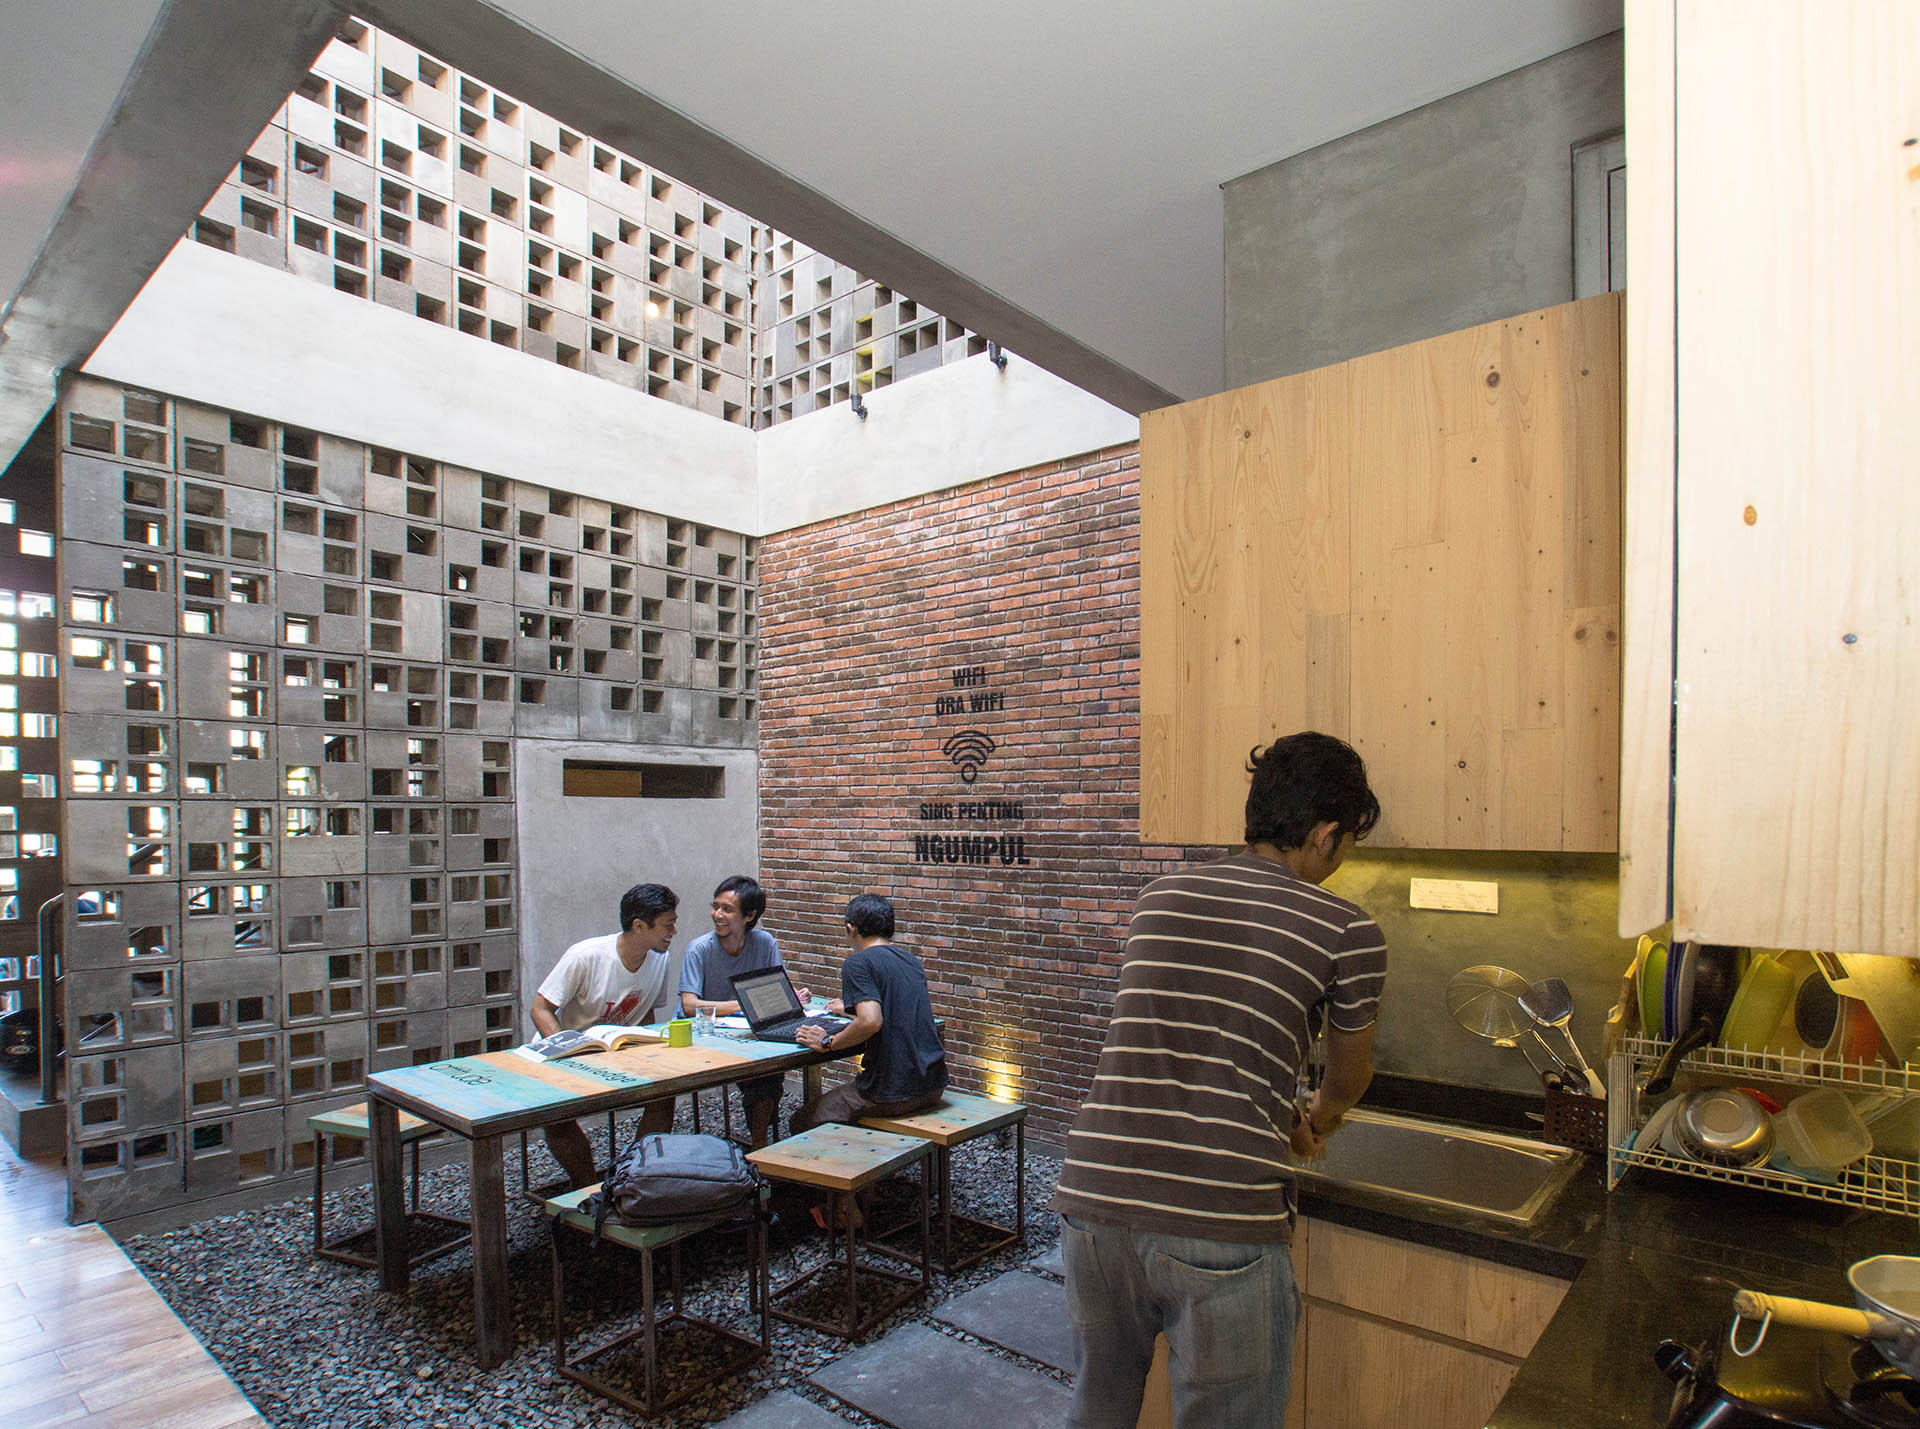 <p>The design borrows two principles from Indonesian architecture. First, communal spaces - here one among the first-floor bedrooms, the other on the roof - to encourage community spirit.&nbsp;Second, rich wall surfaces: here pierced concrete panels inspired by gedheg (woven bamboo) and gebyog (wood panels).</p>